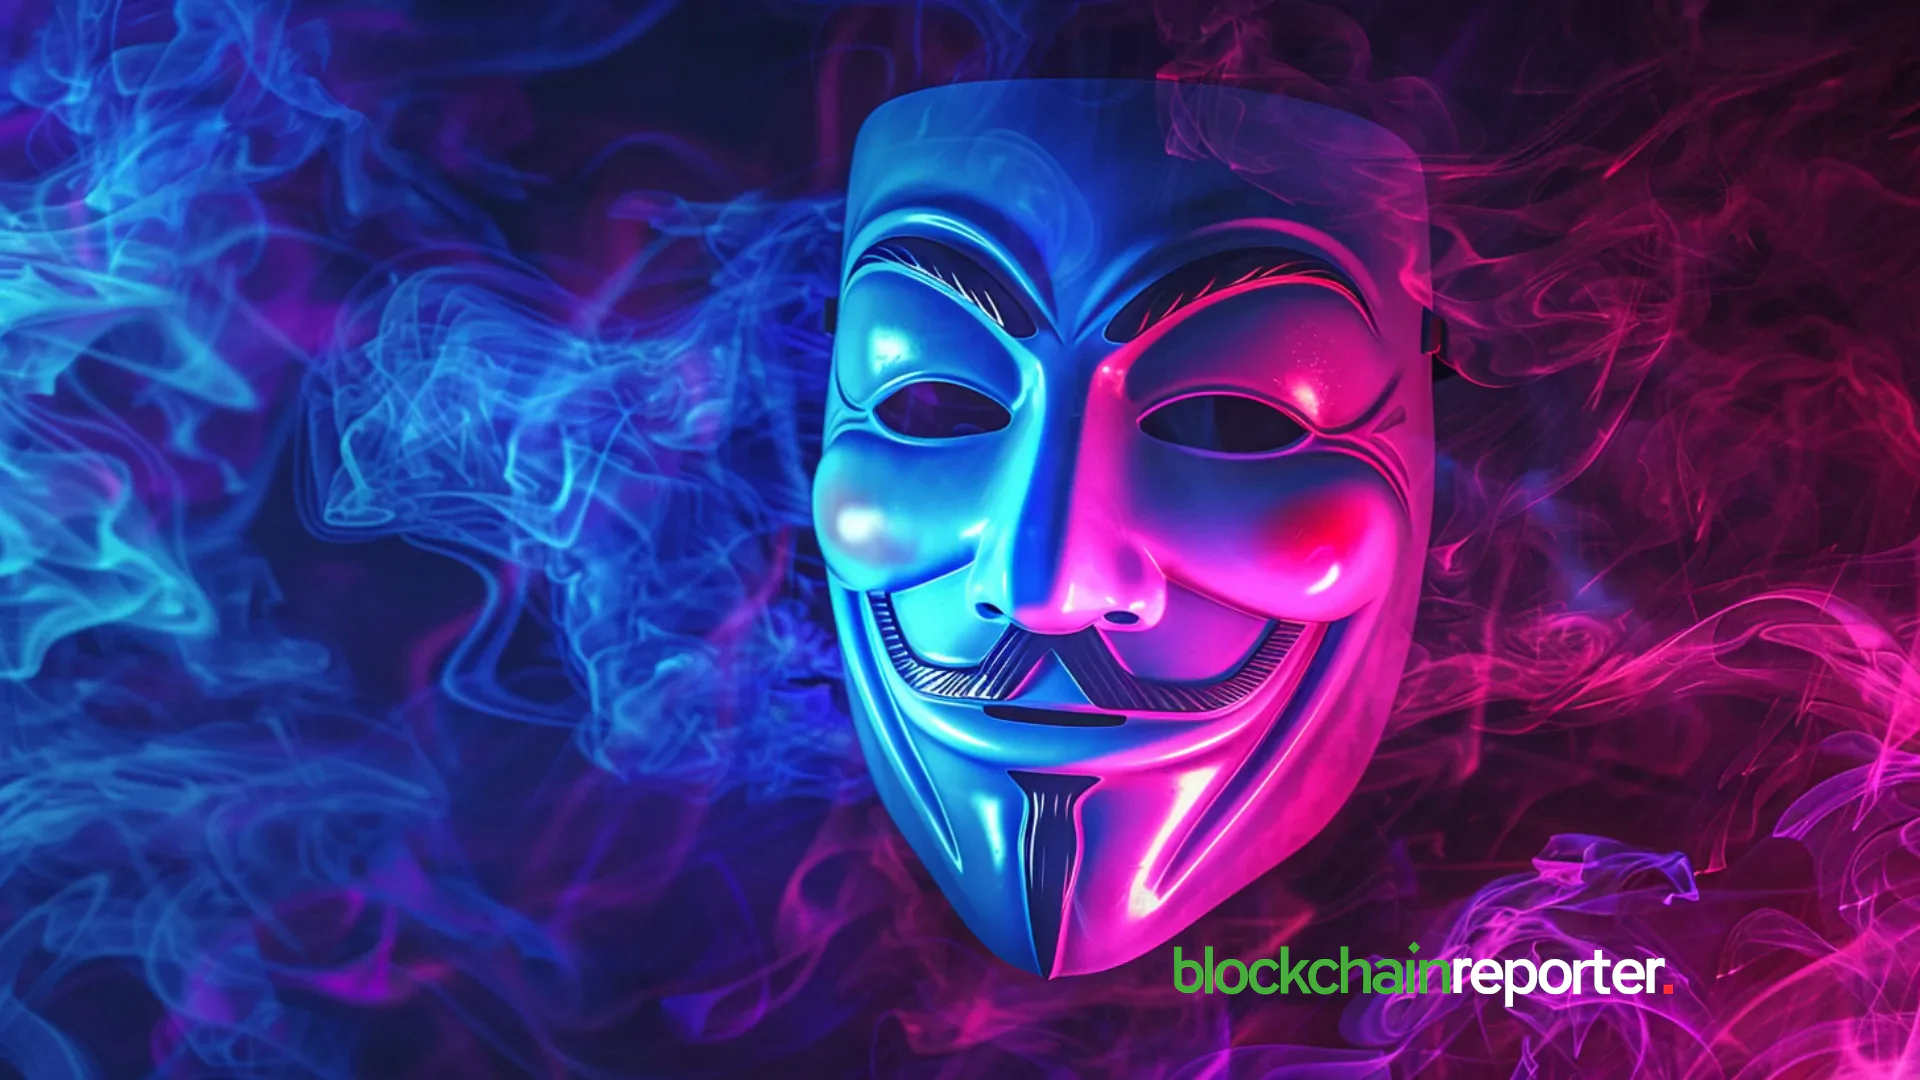 AnonExch Review: The Vanguard of Privacy in the Crypto Sphere